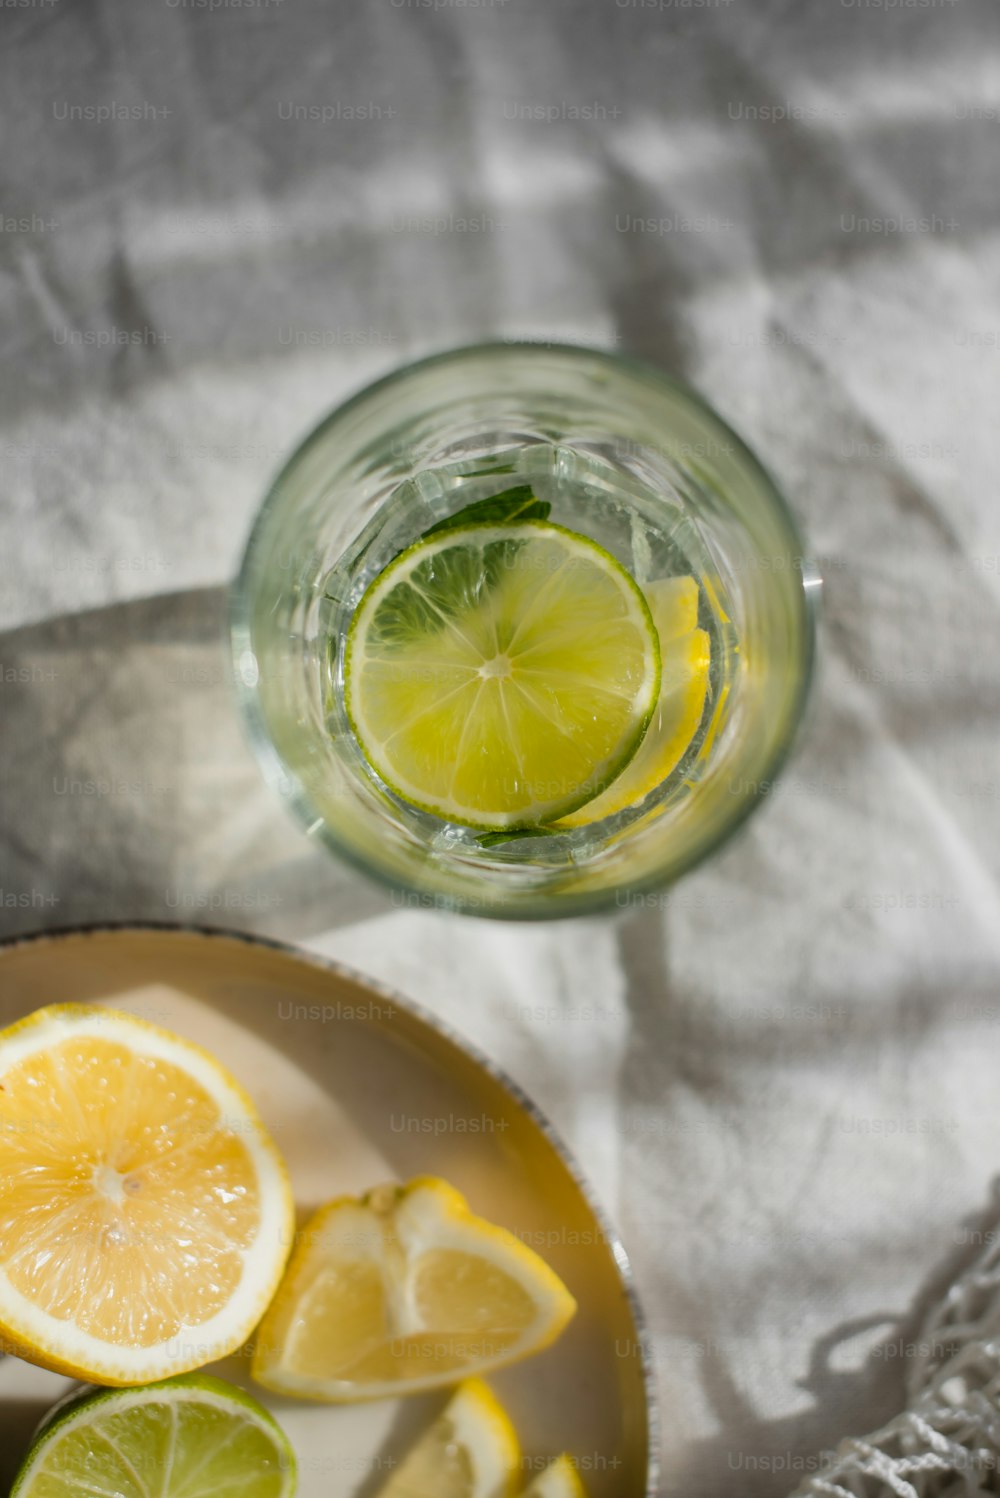 a bowl of lemons and a glass of water